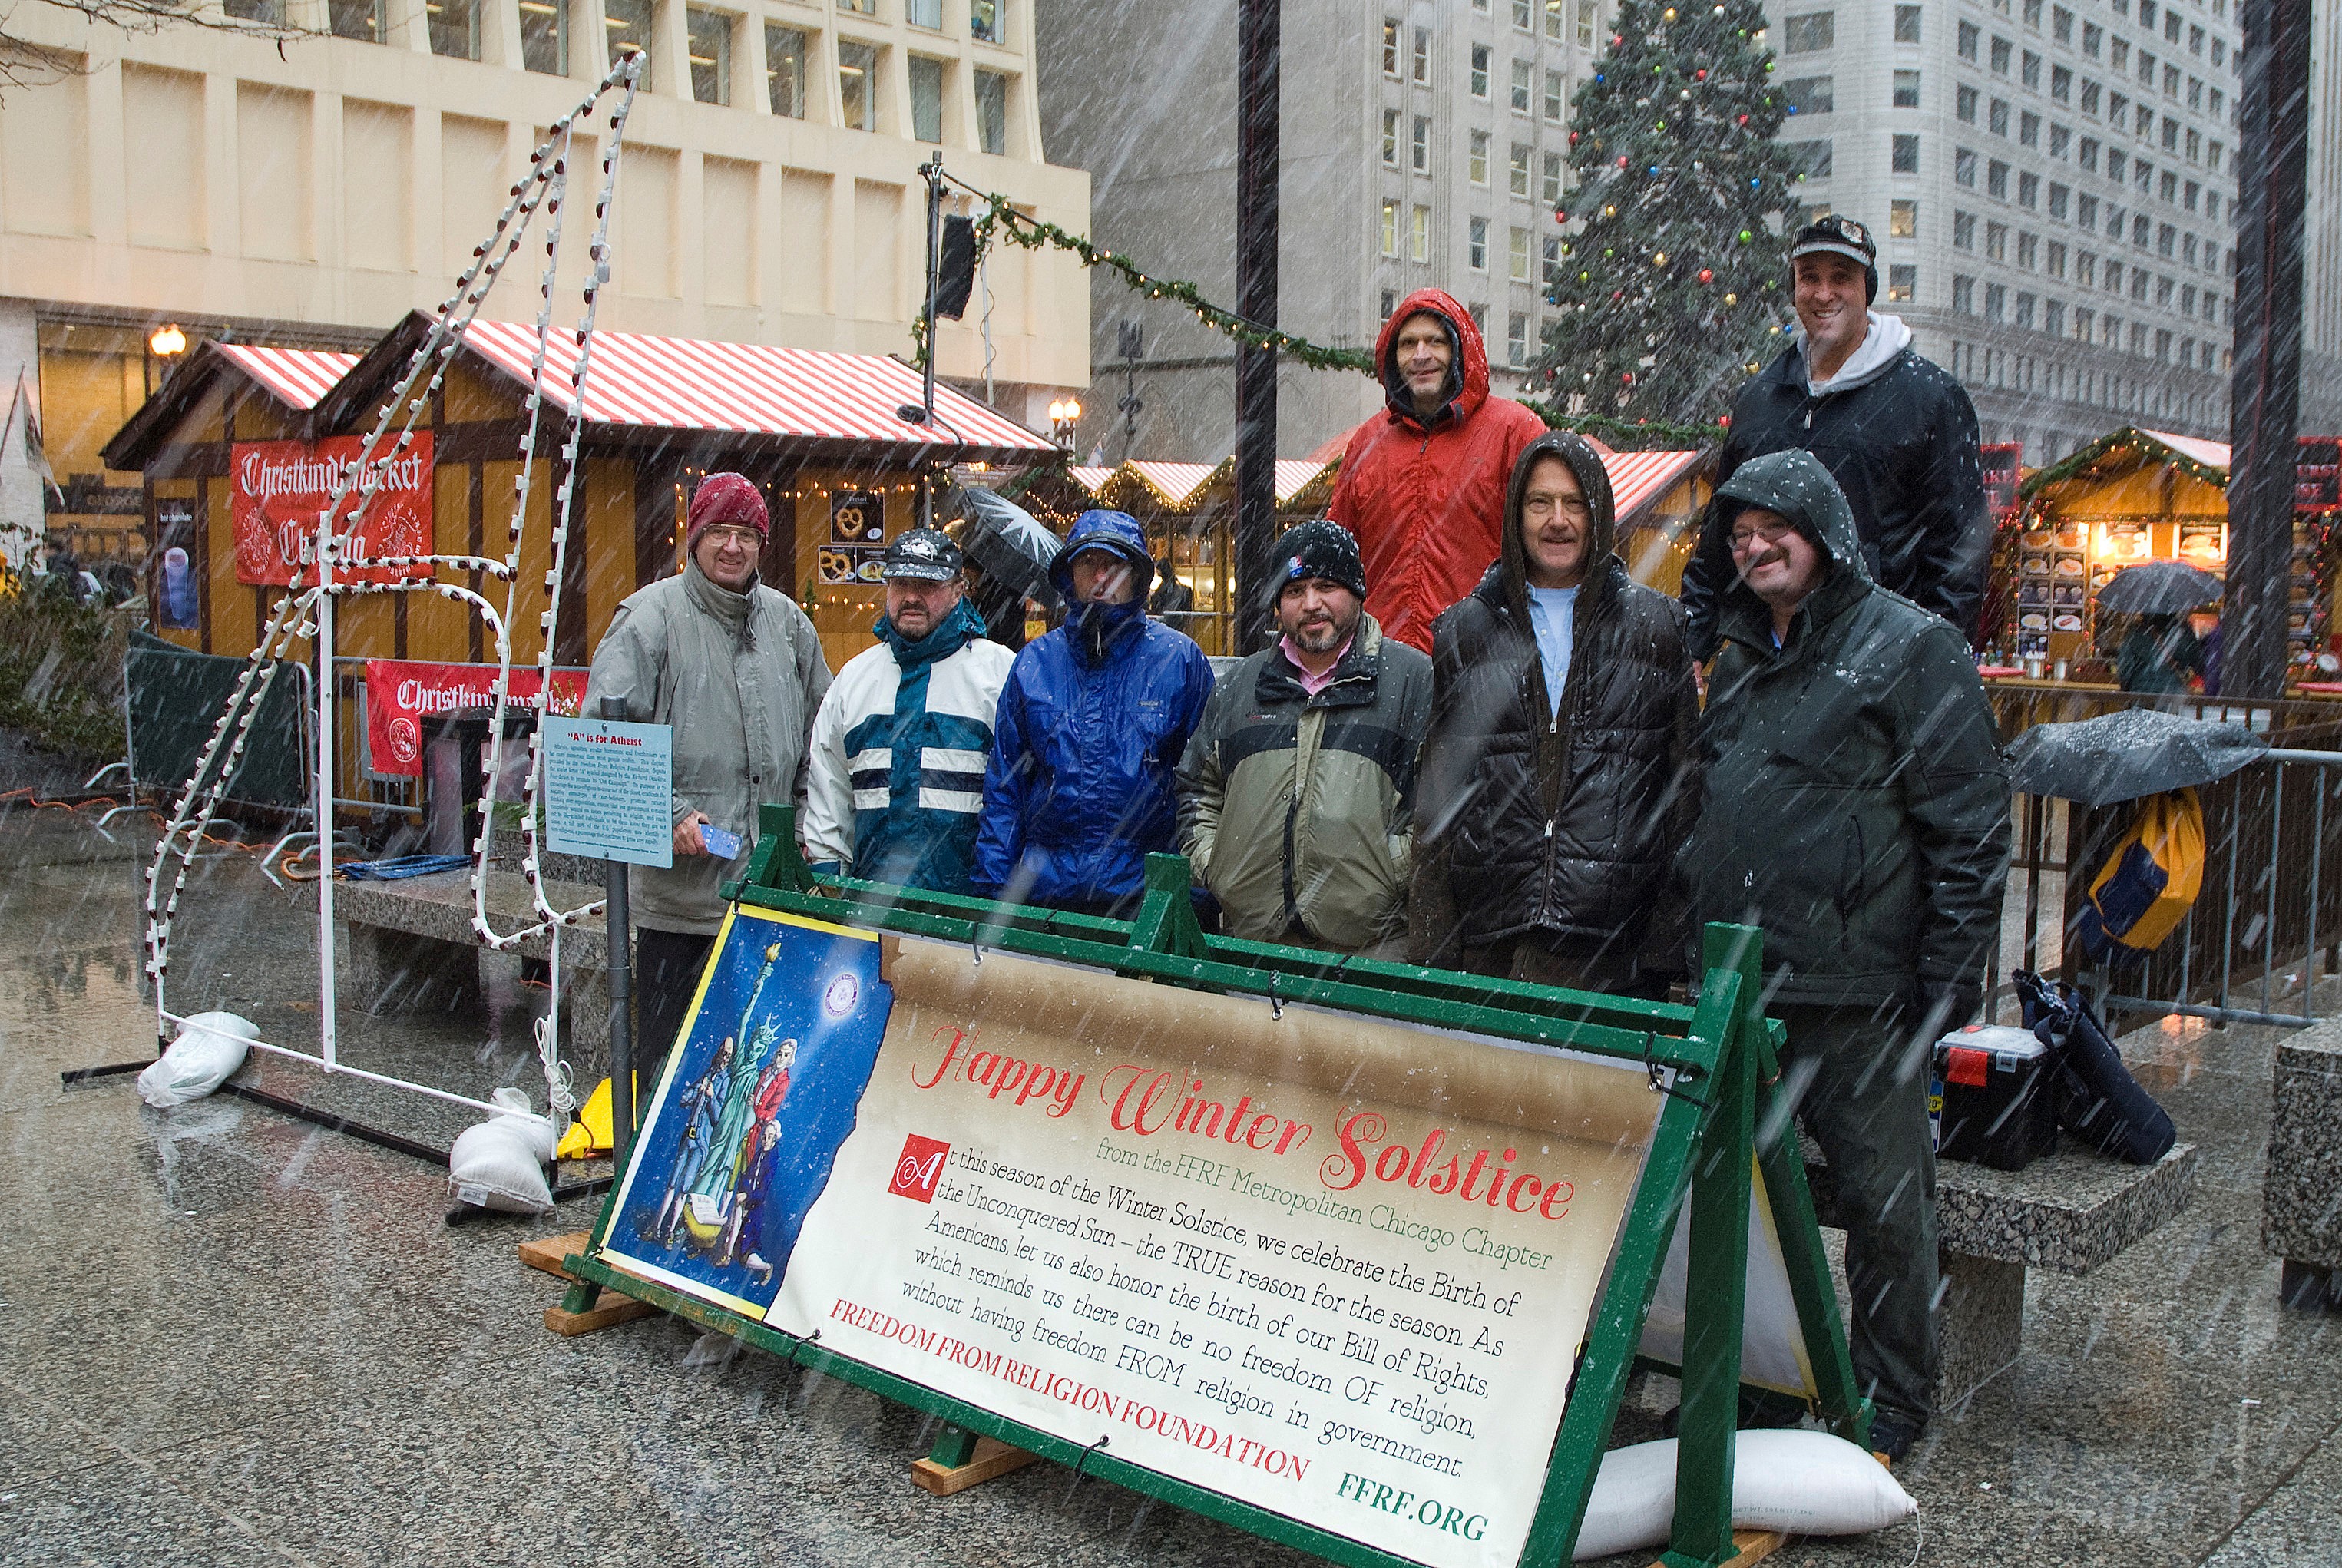 Members of the Freedom From Religion Foundation, Metropolitan Chicago Chapter, put up an atheist display in Daley Plaza.